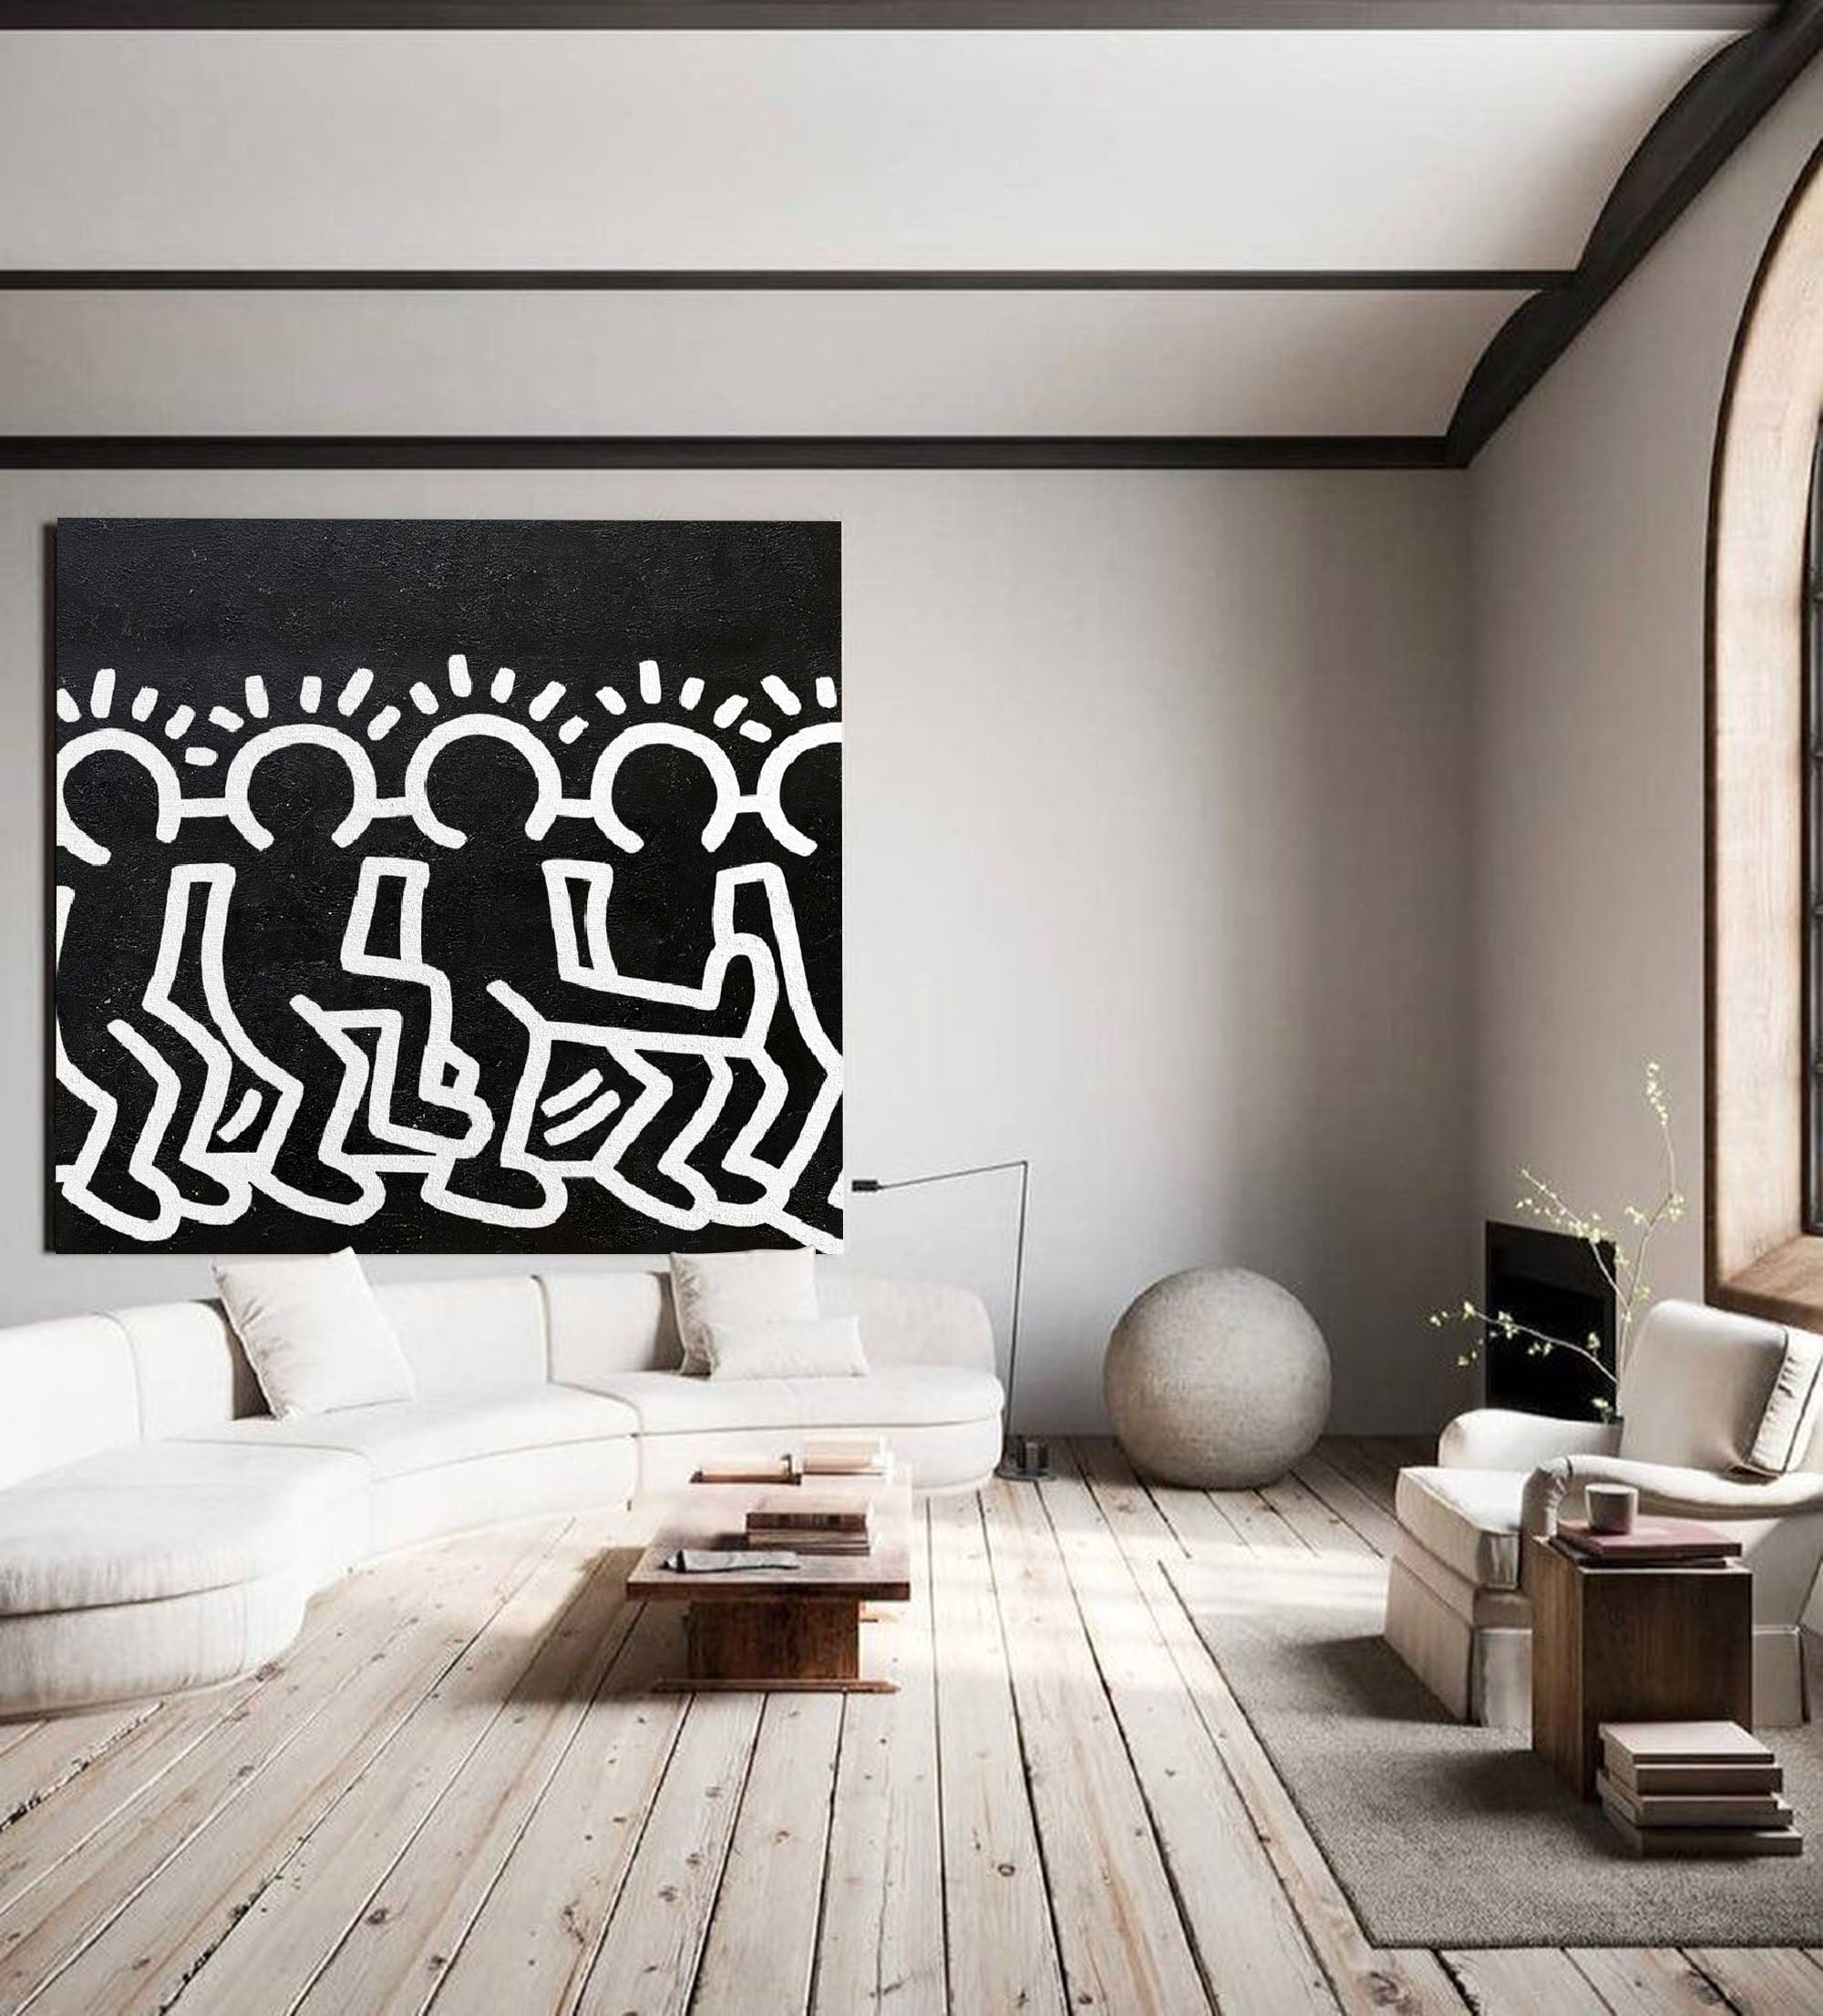 Keith Haring Style painting #KS022